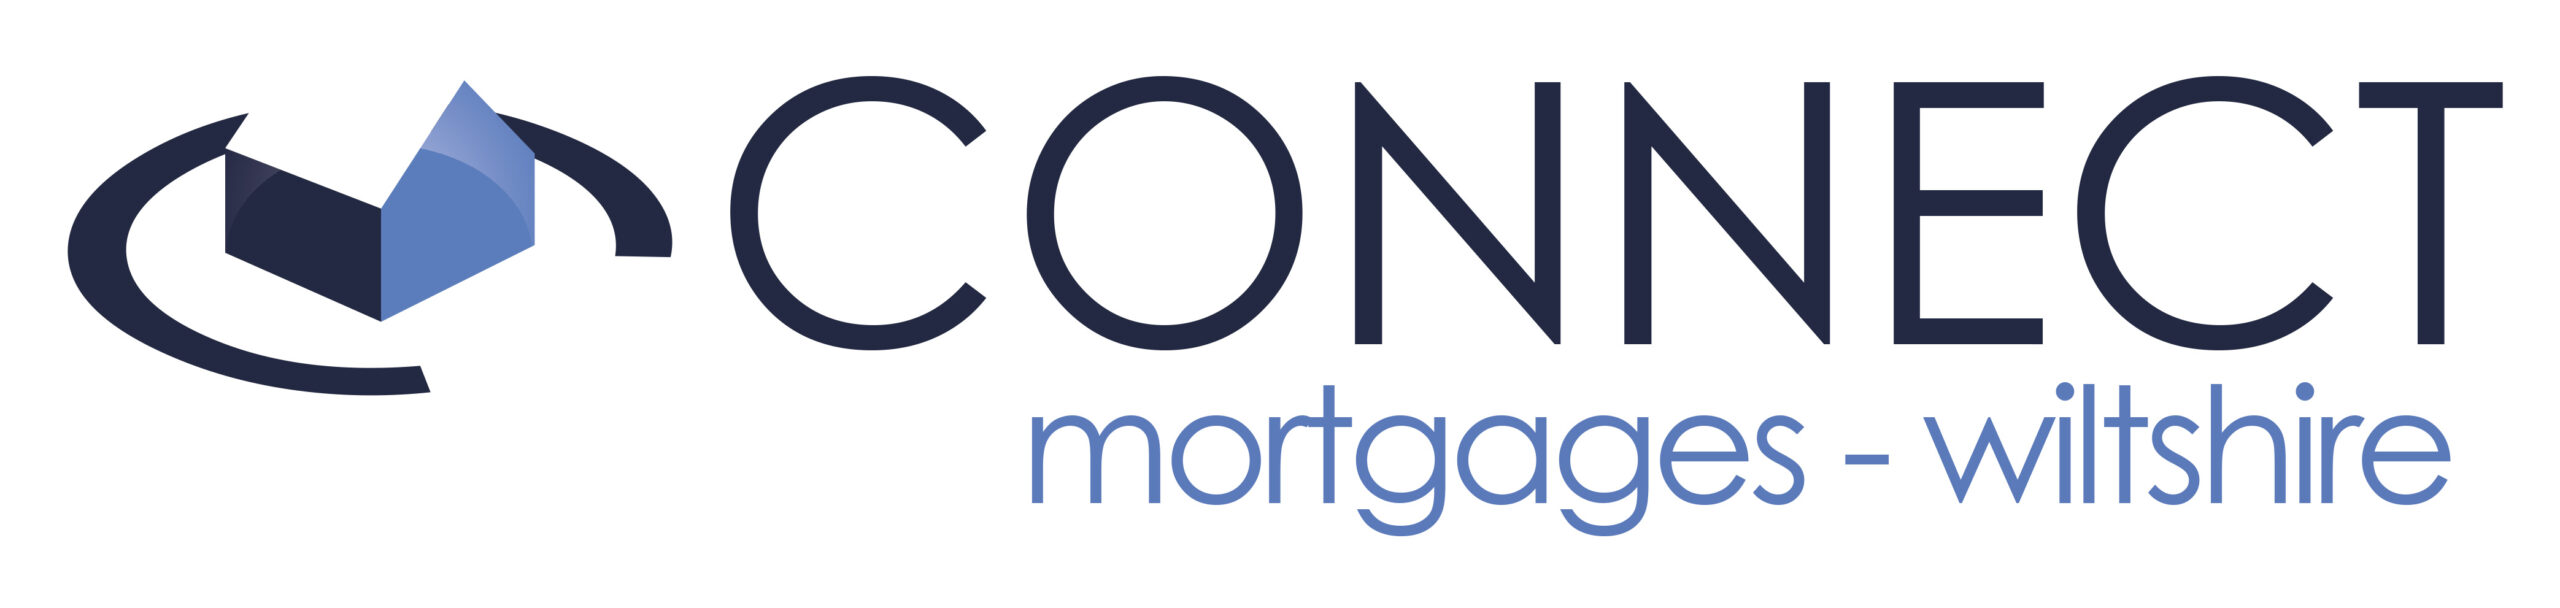 Connect Mortgages Wiltshire